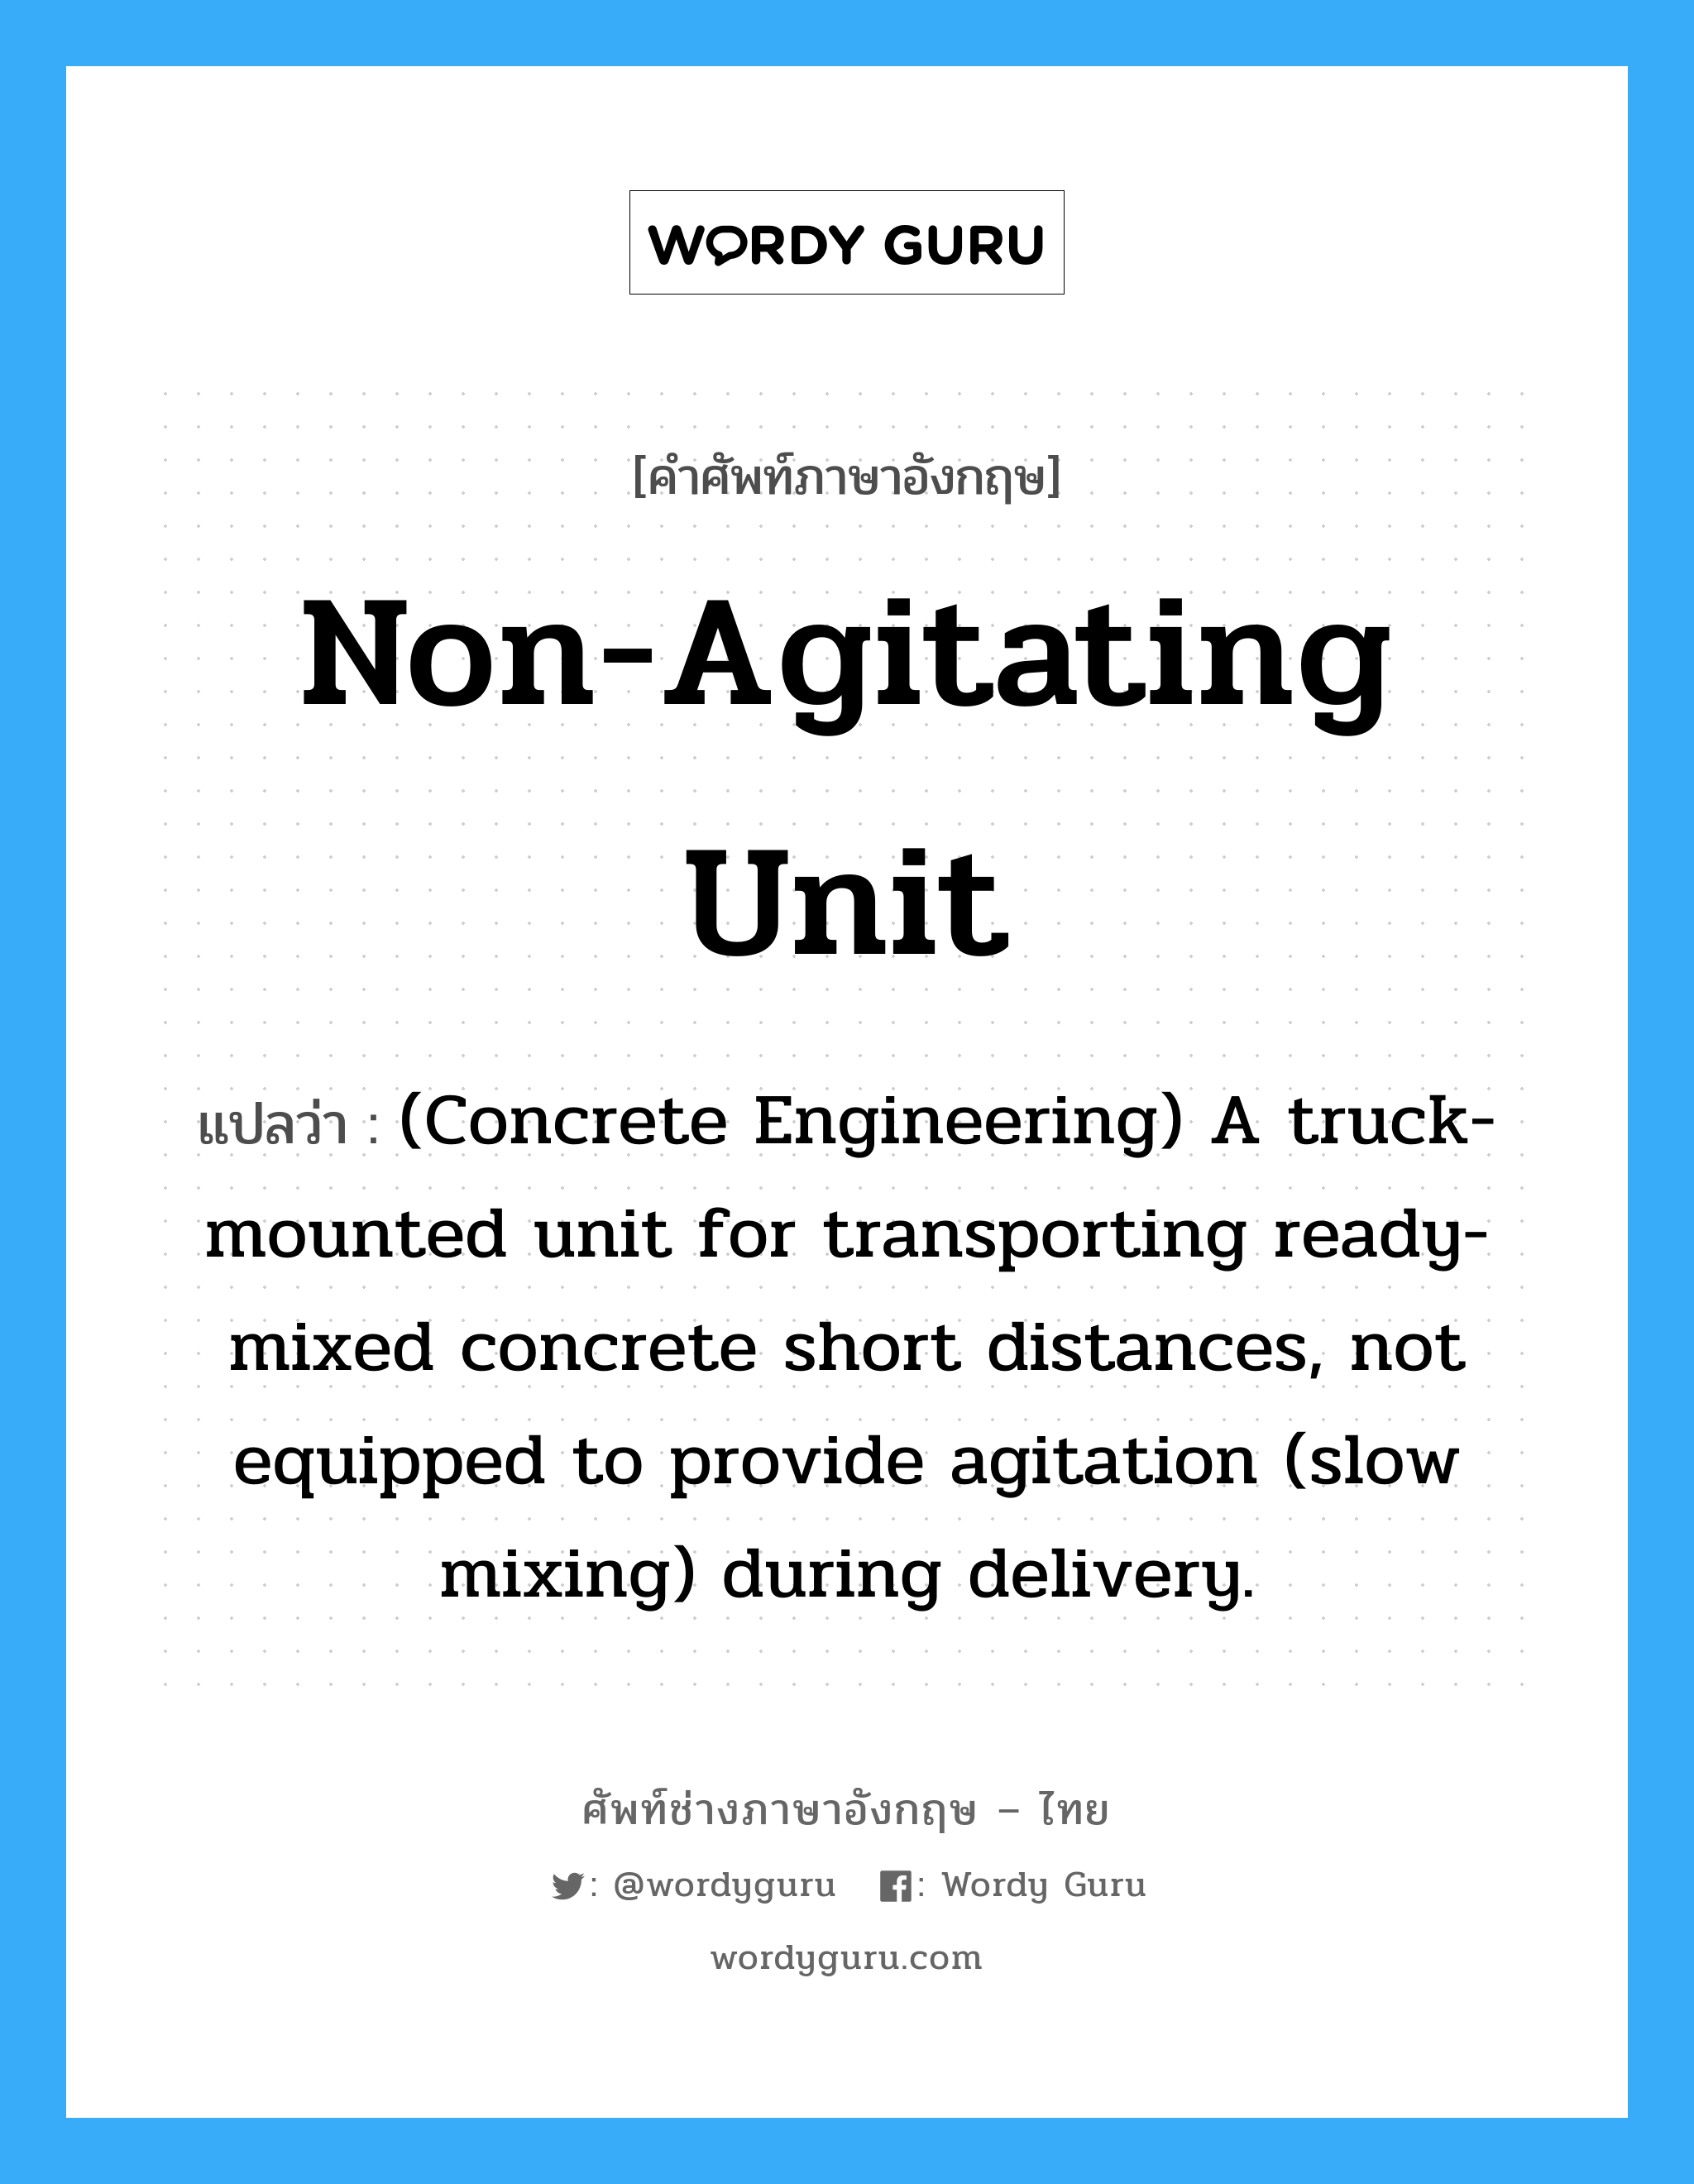 (Concrete Engineering) A truck-mounted unit for transporting ready-mixed concrete short distances, not equipped to provide agitation (slow mixing) during delivery. ภาษาอังกฤษ?, คำศัพท์ช่างภาษาอังกฤษ - ไทย (Concrete Engineering) A truck-mounted unit for transporting ready-mixed concrete short distances, not equipped to provide agitation (slow mixing) during delivery. คำศัพท์ภาษาอังกฤษ (Concrete Engineering) A truck-mounted unit for transporting ready-mixed concrete short distances, not equipped to provide agitation (slow mixing) during delivery. แปลว่า Non-agitating Unit